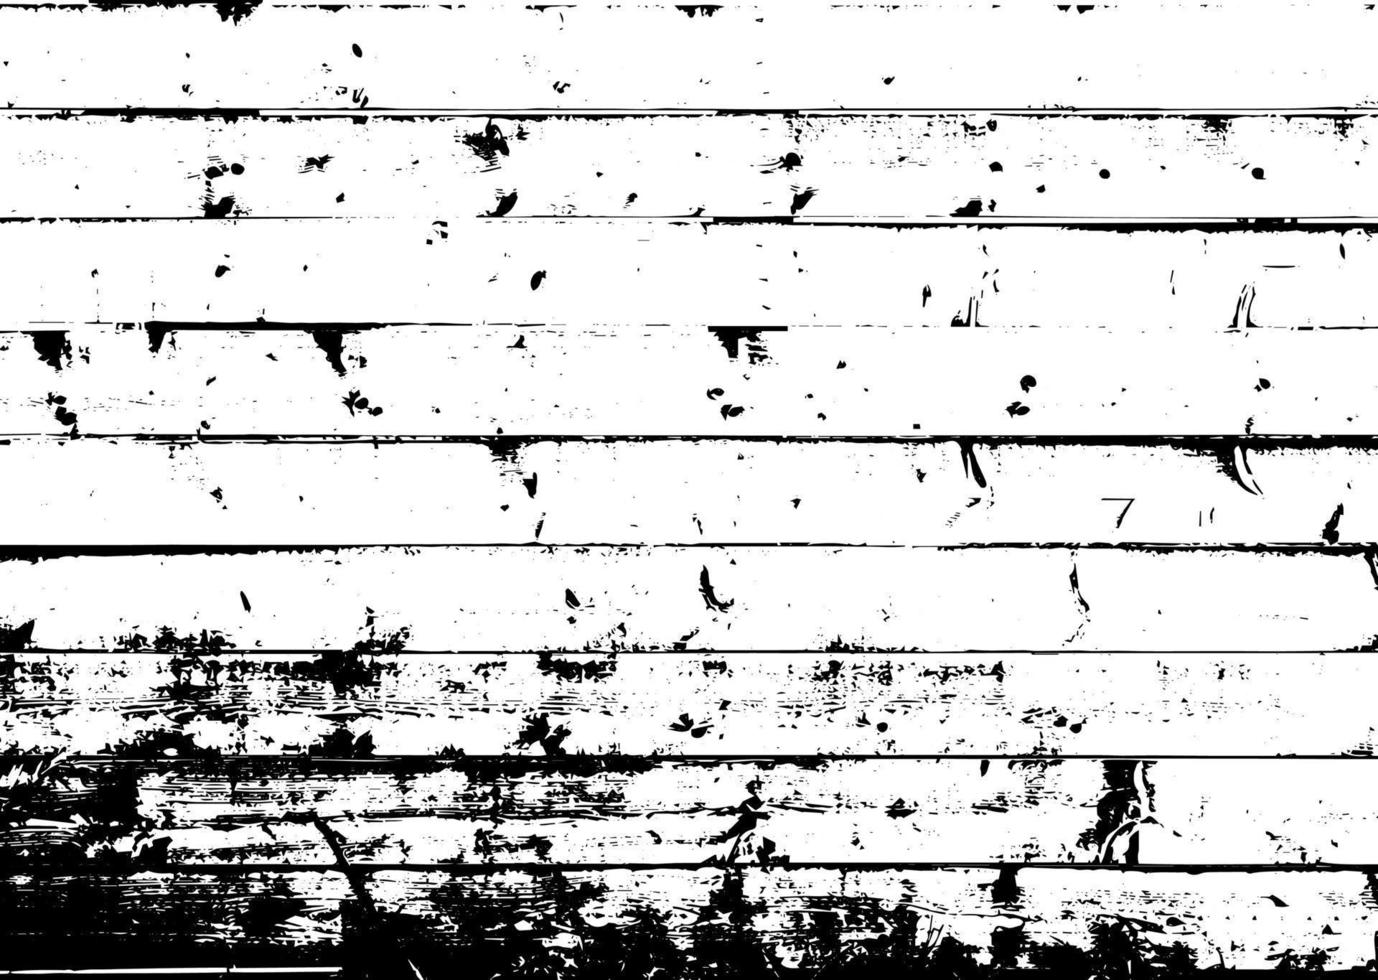 Grunge stripes and lines vector texture background. Abstract overlay. Dirty and damaged backdrop.